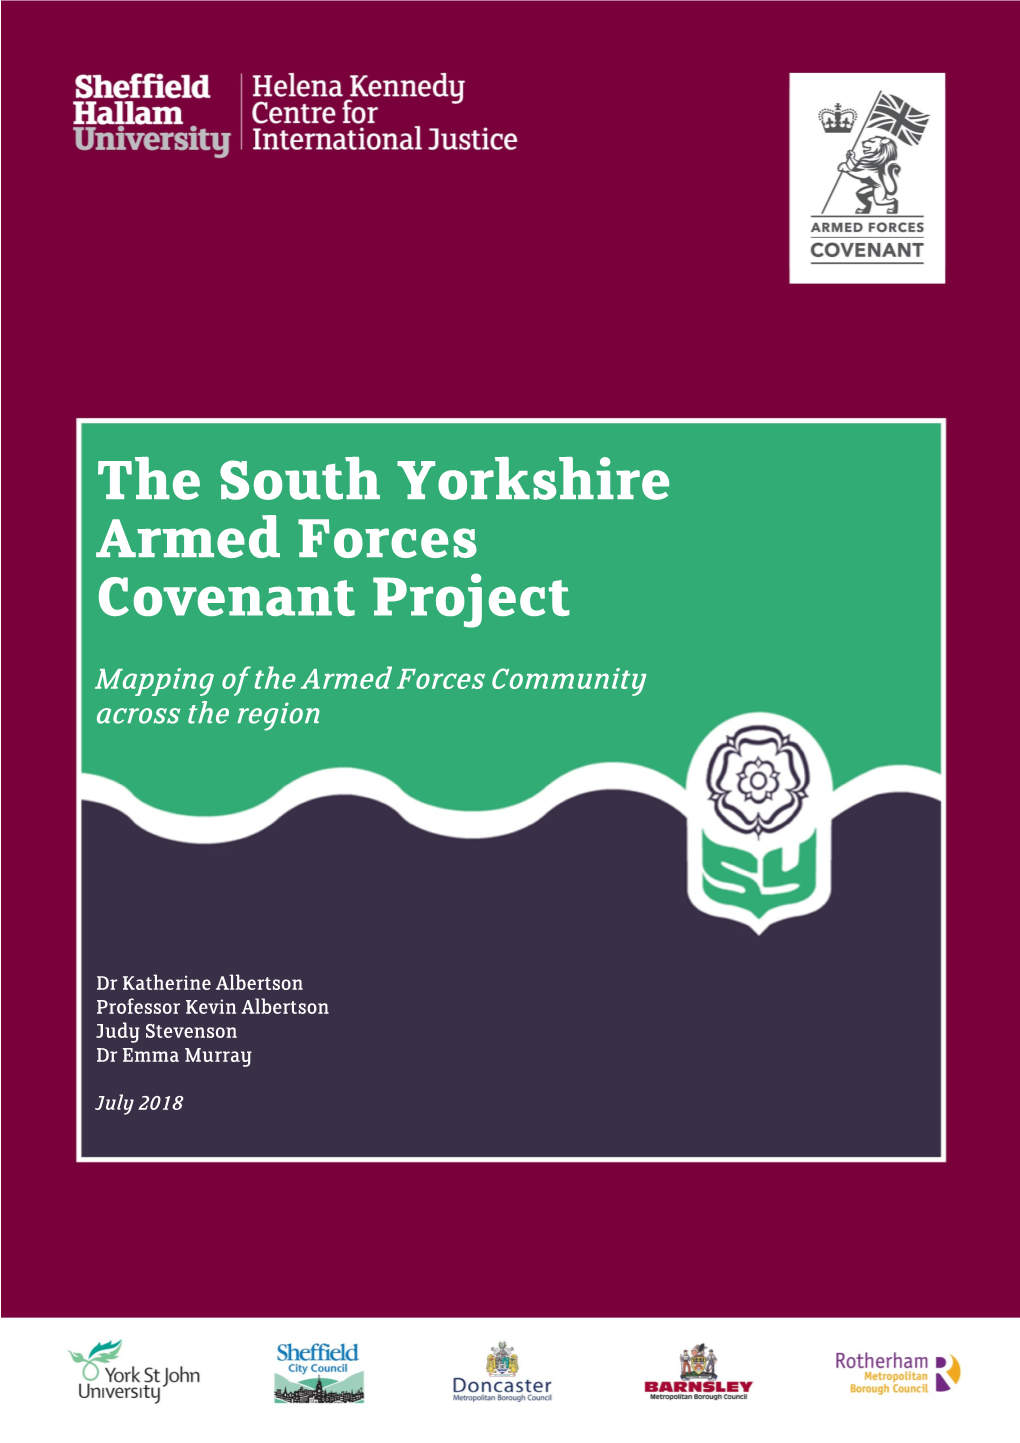 The South Yorkshire Armed Forces Covenant Project